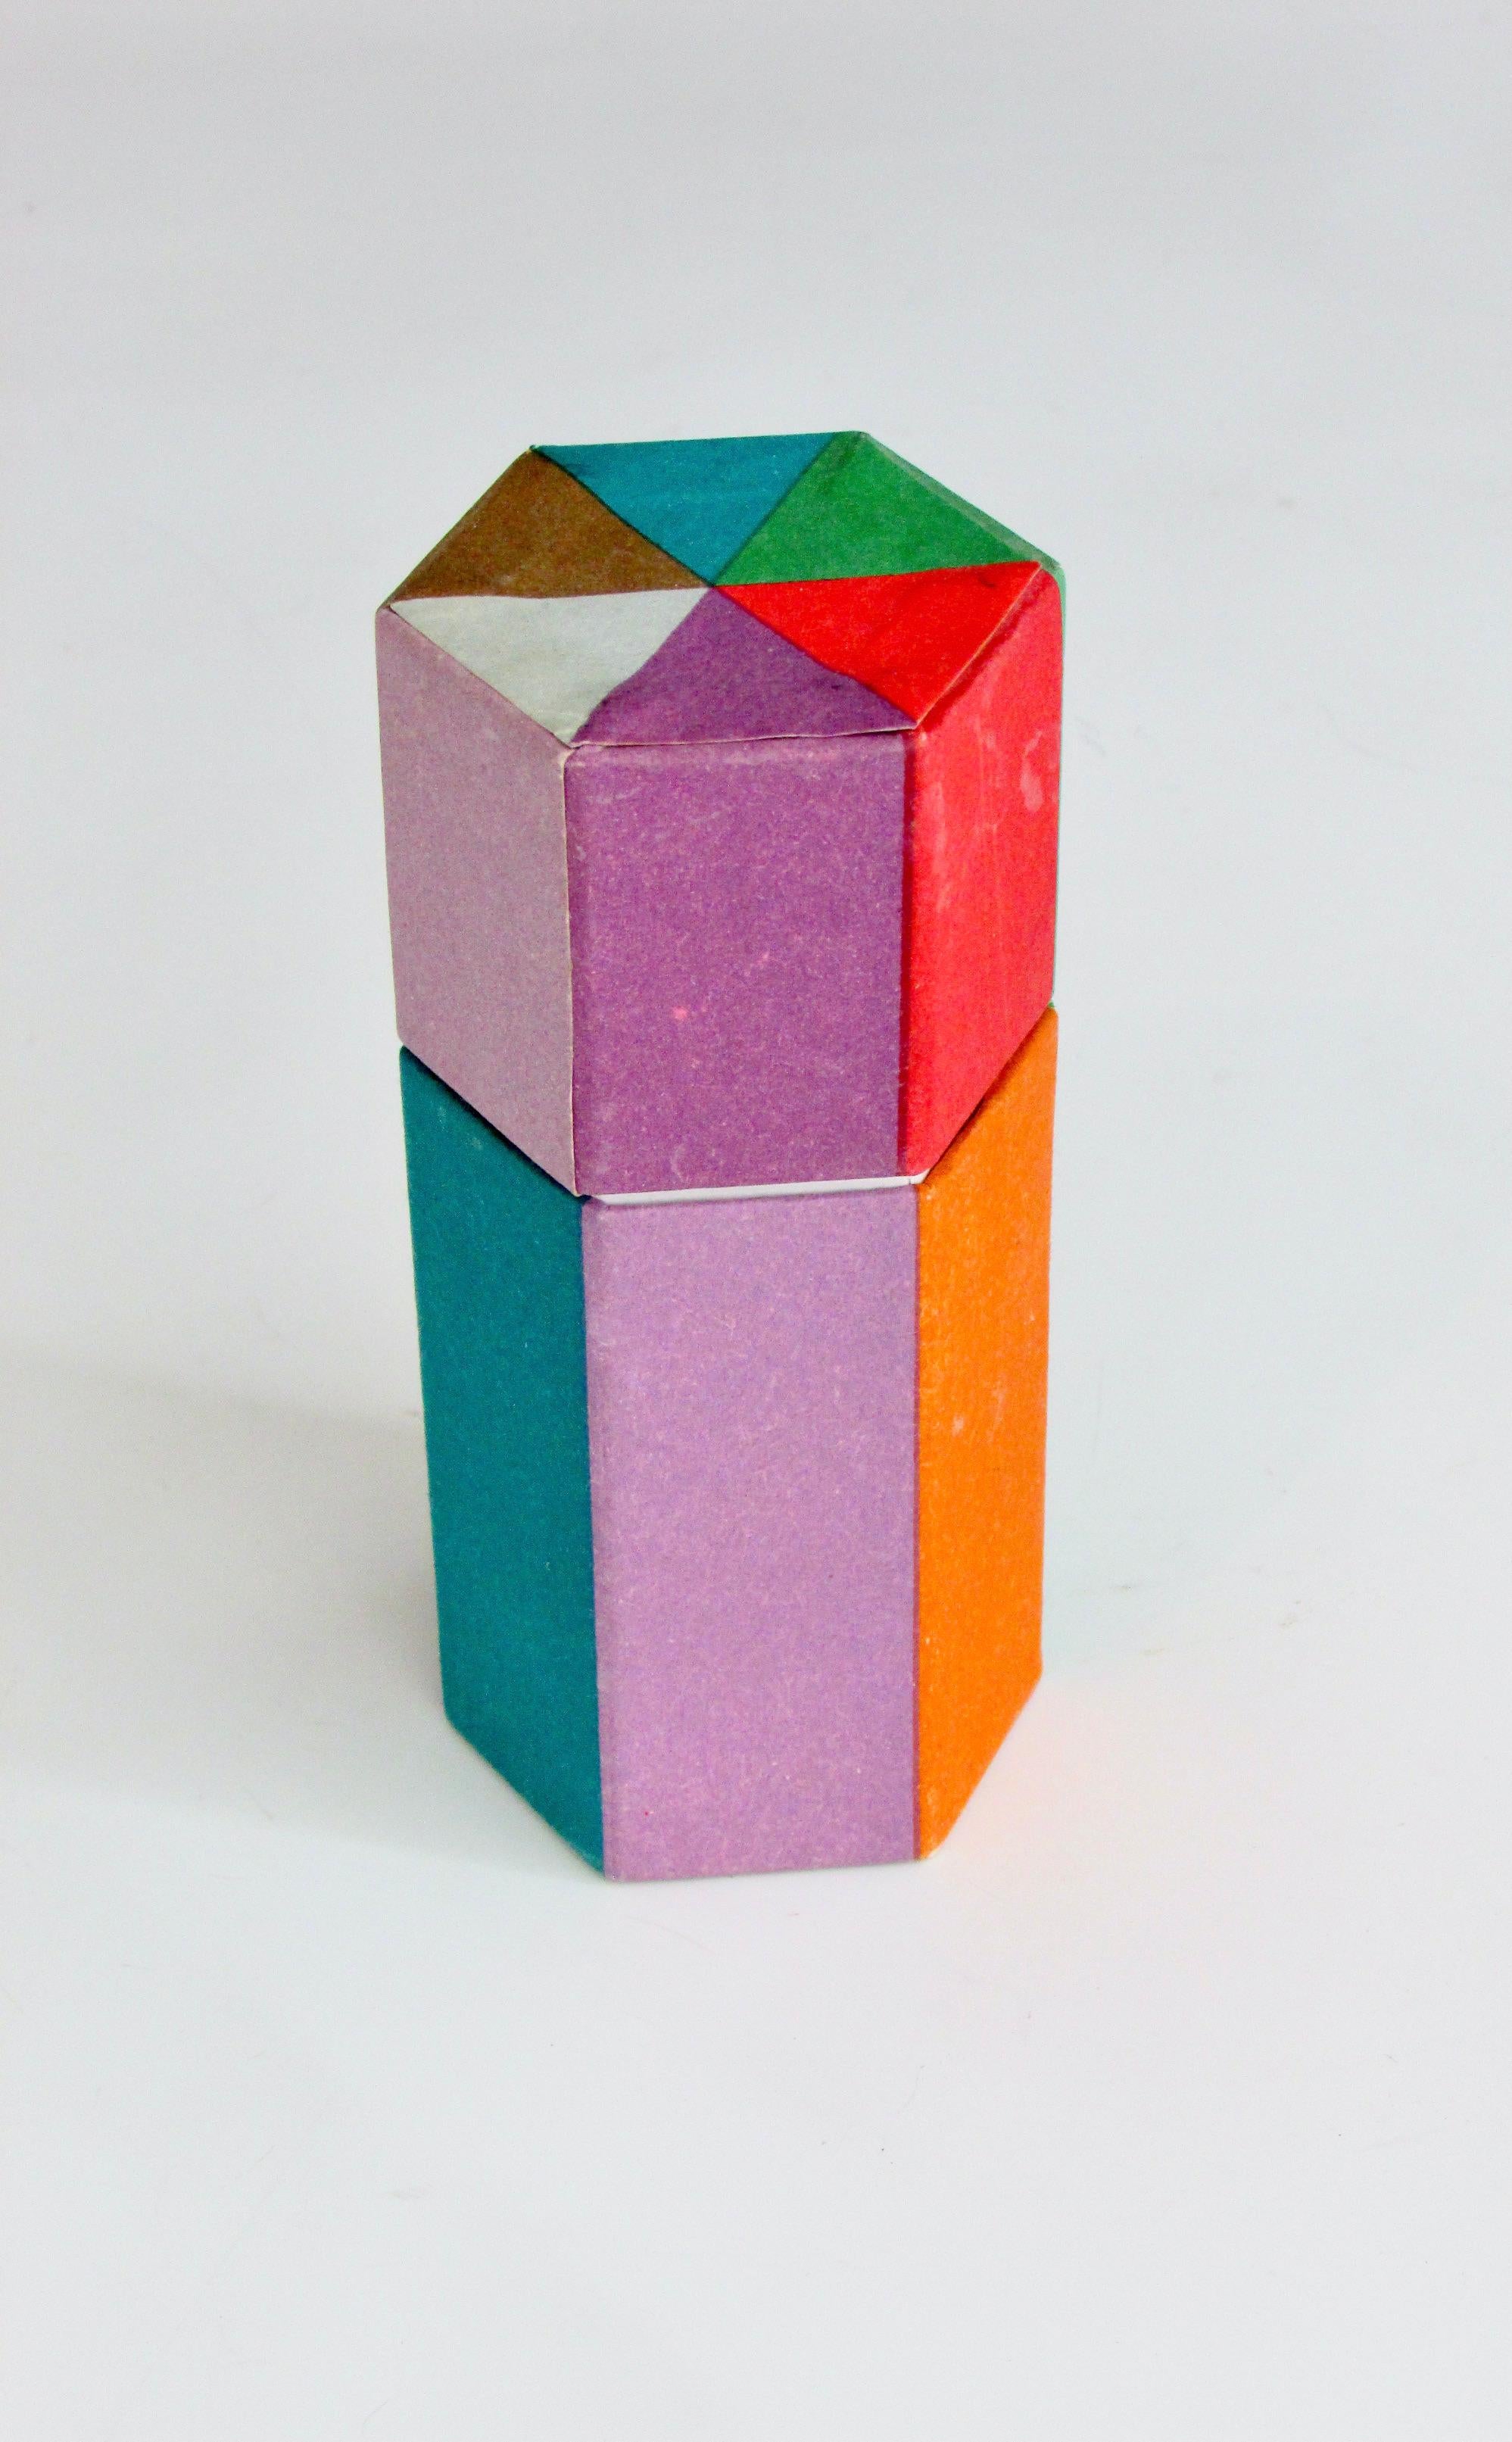 Geometric design match box with individual color panels of construction paper. Inside fitted with color head matches. Marked Japan on underside.